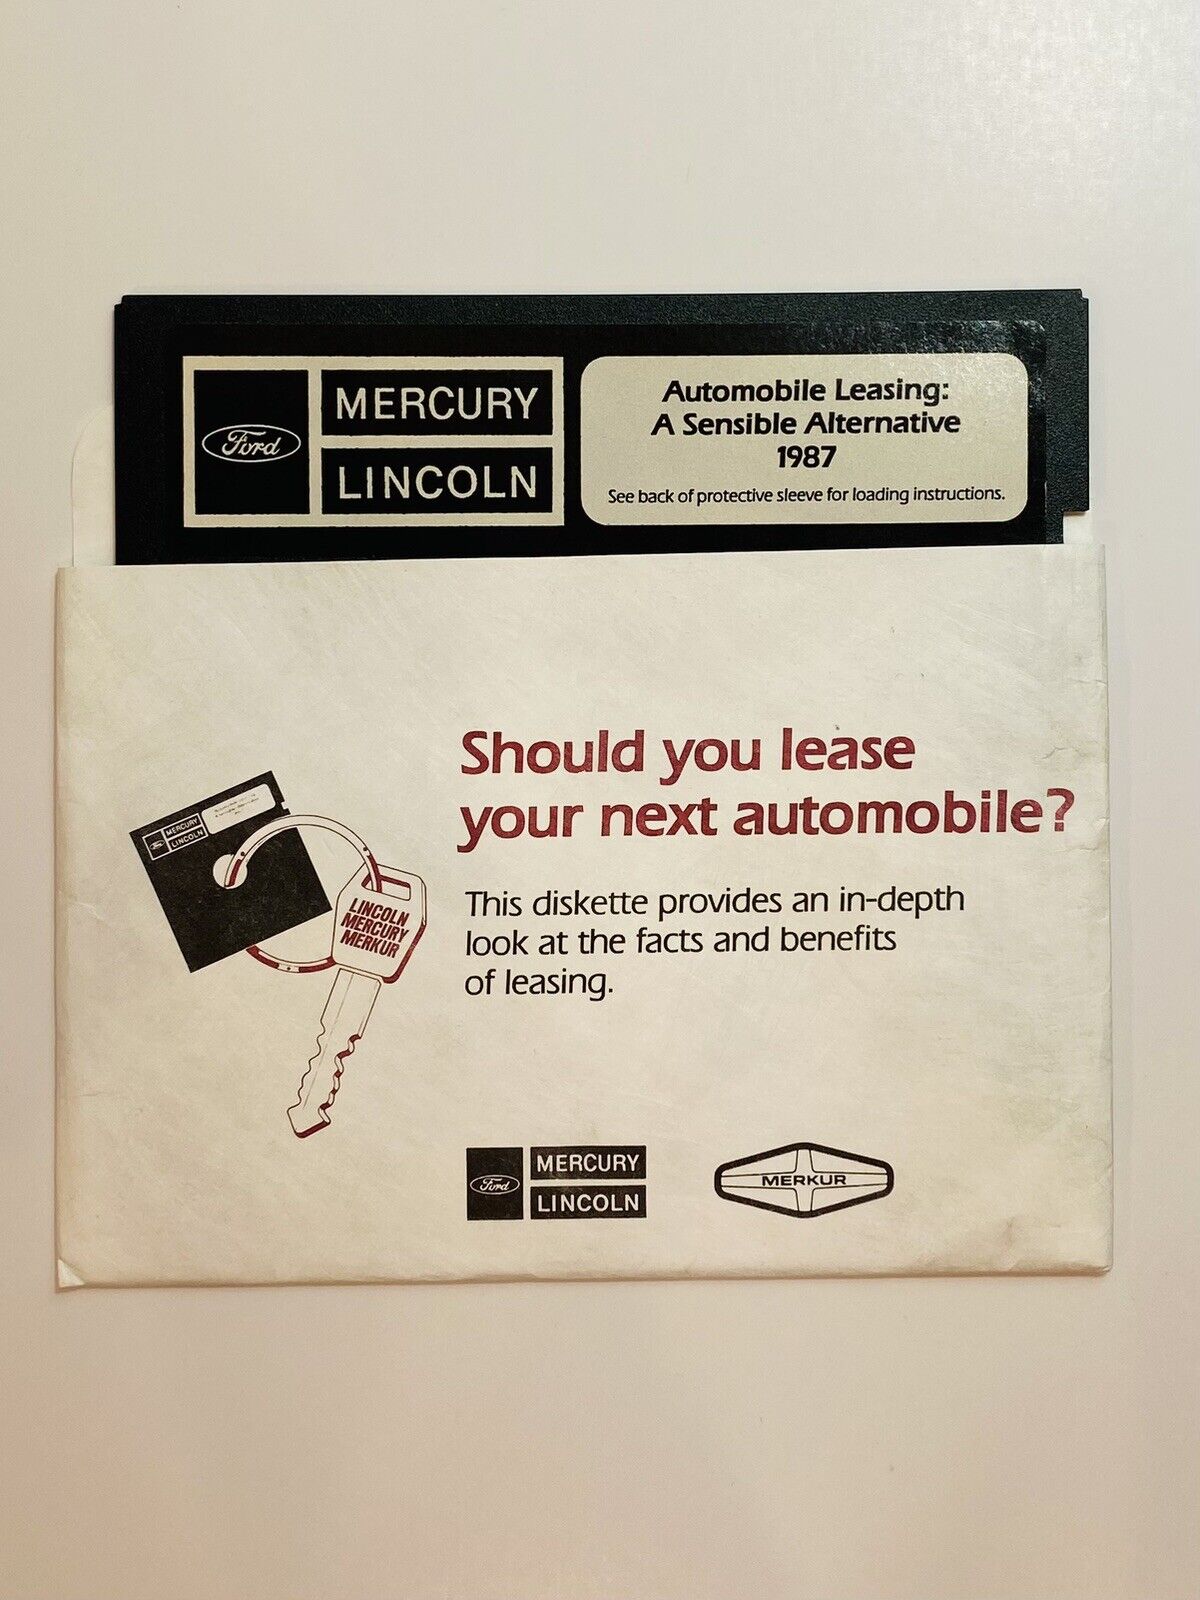 Ford Lincoln Mercury Leasing Software Brochure Floppy Disk Vintage 1987